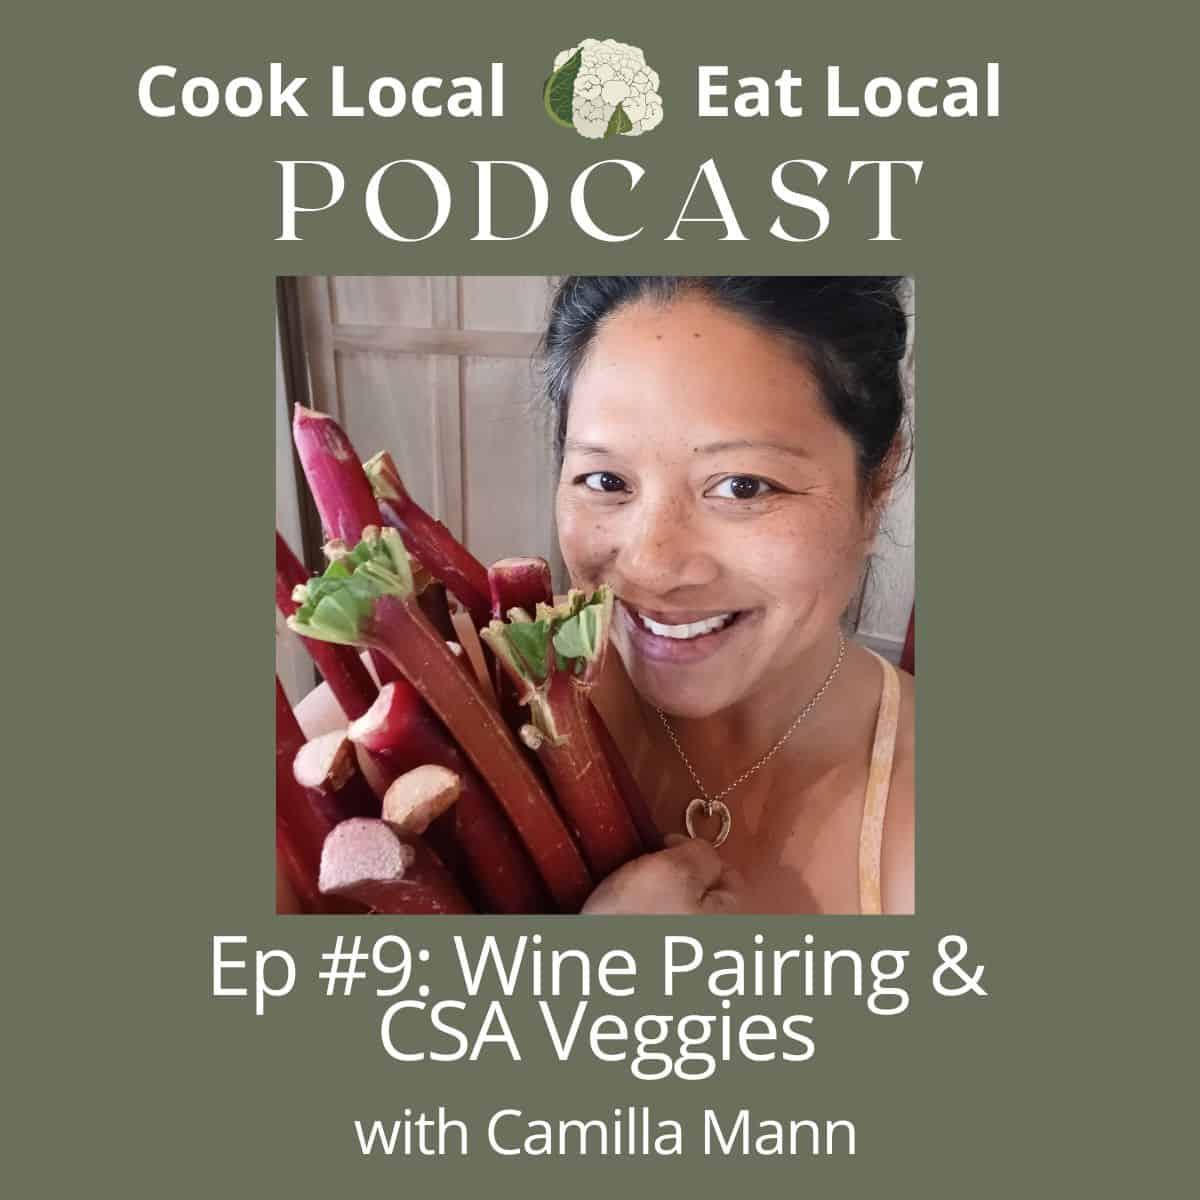 Photo of Camilla Mann with some rhubarb, with with text with says wine pairing and CSA veggies.